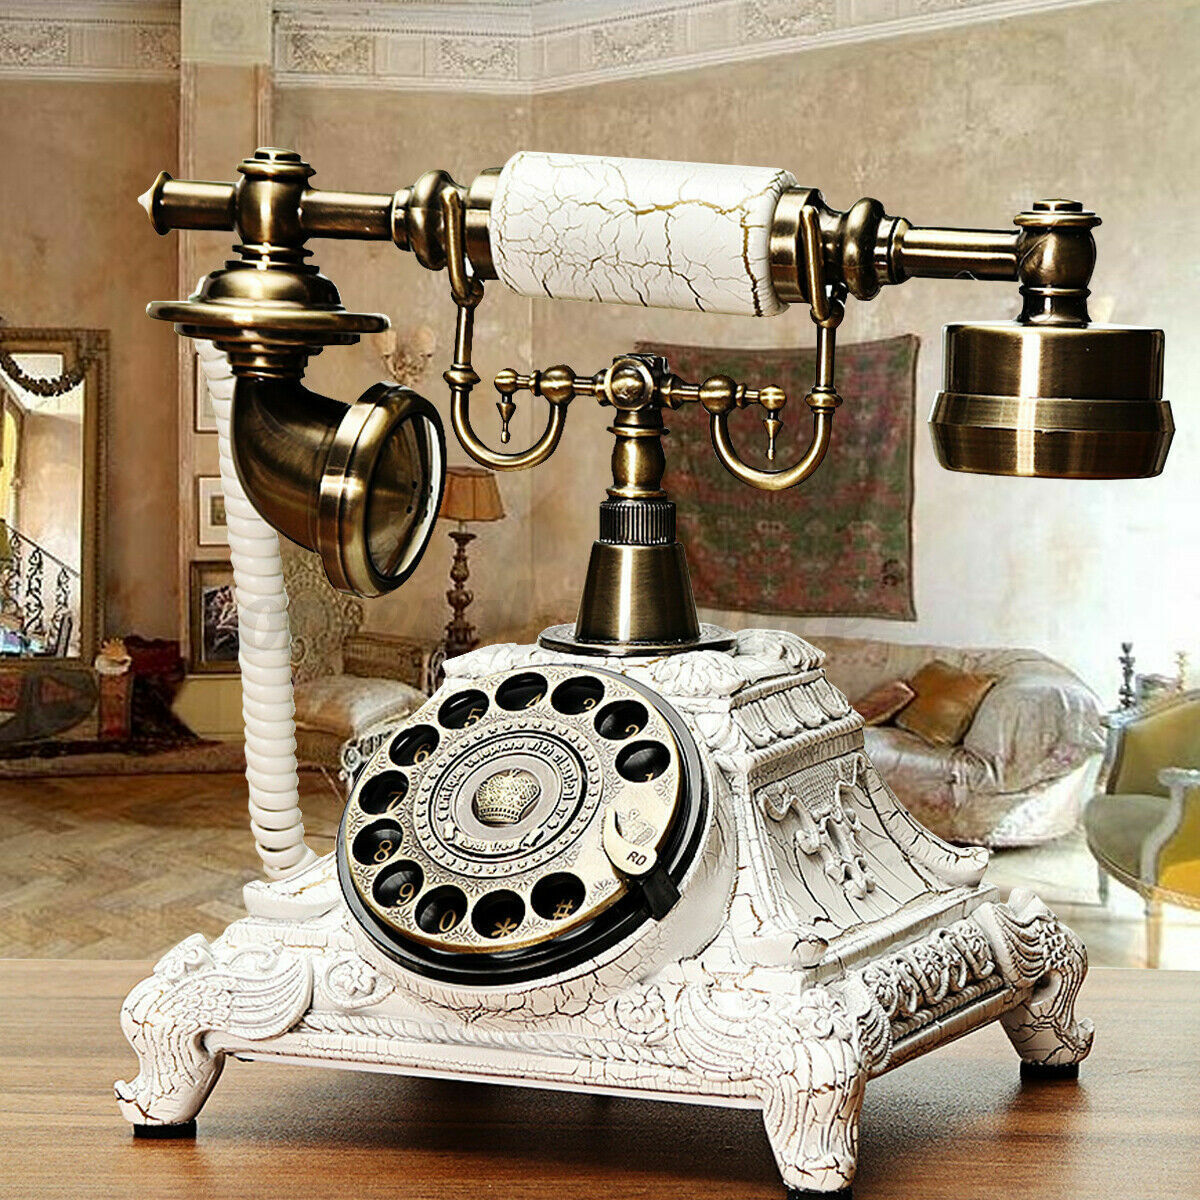 Antique European Style Old Fashioned Rotary Vintage Dial Phone Handset Telephone